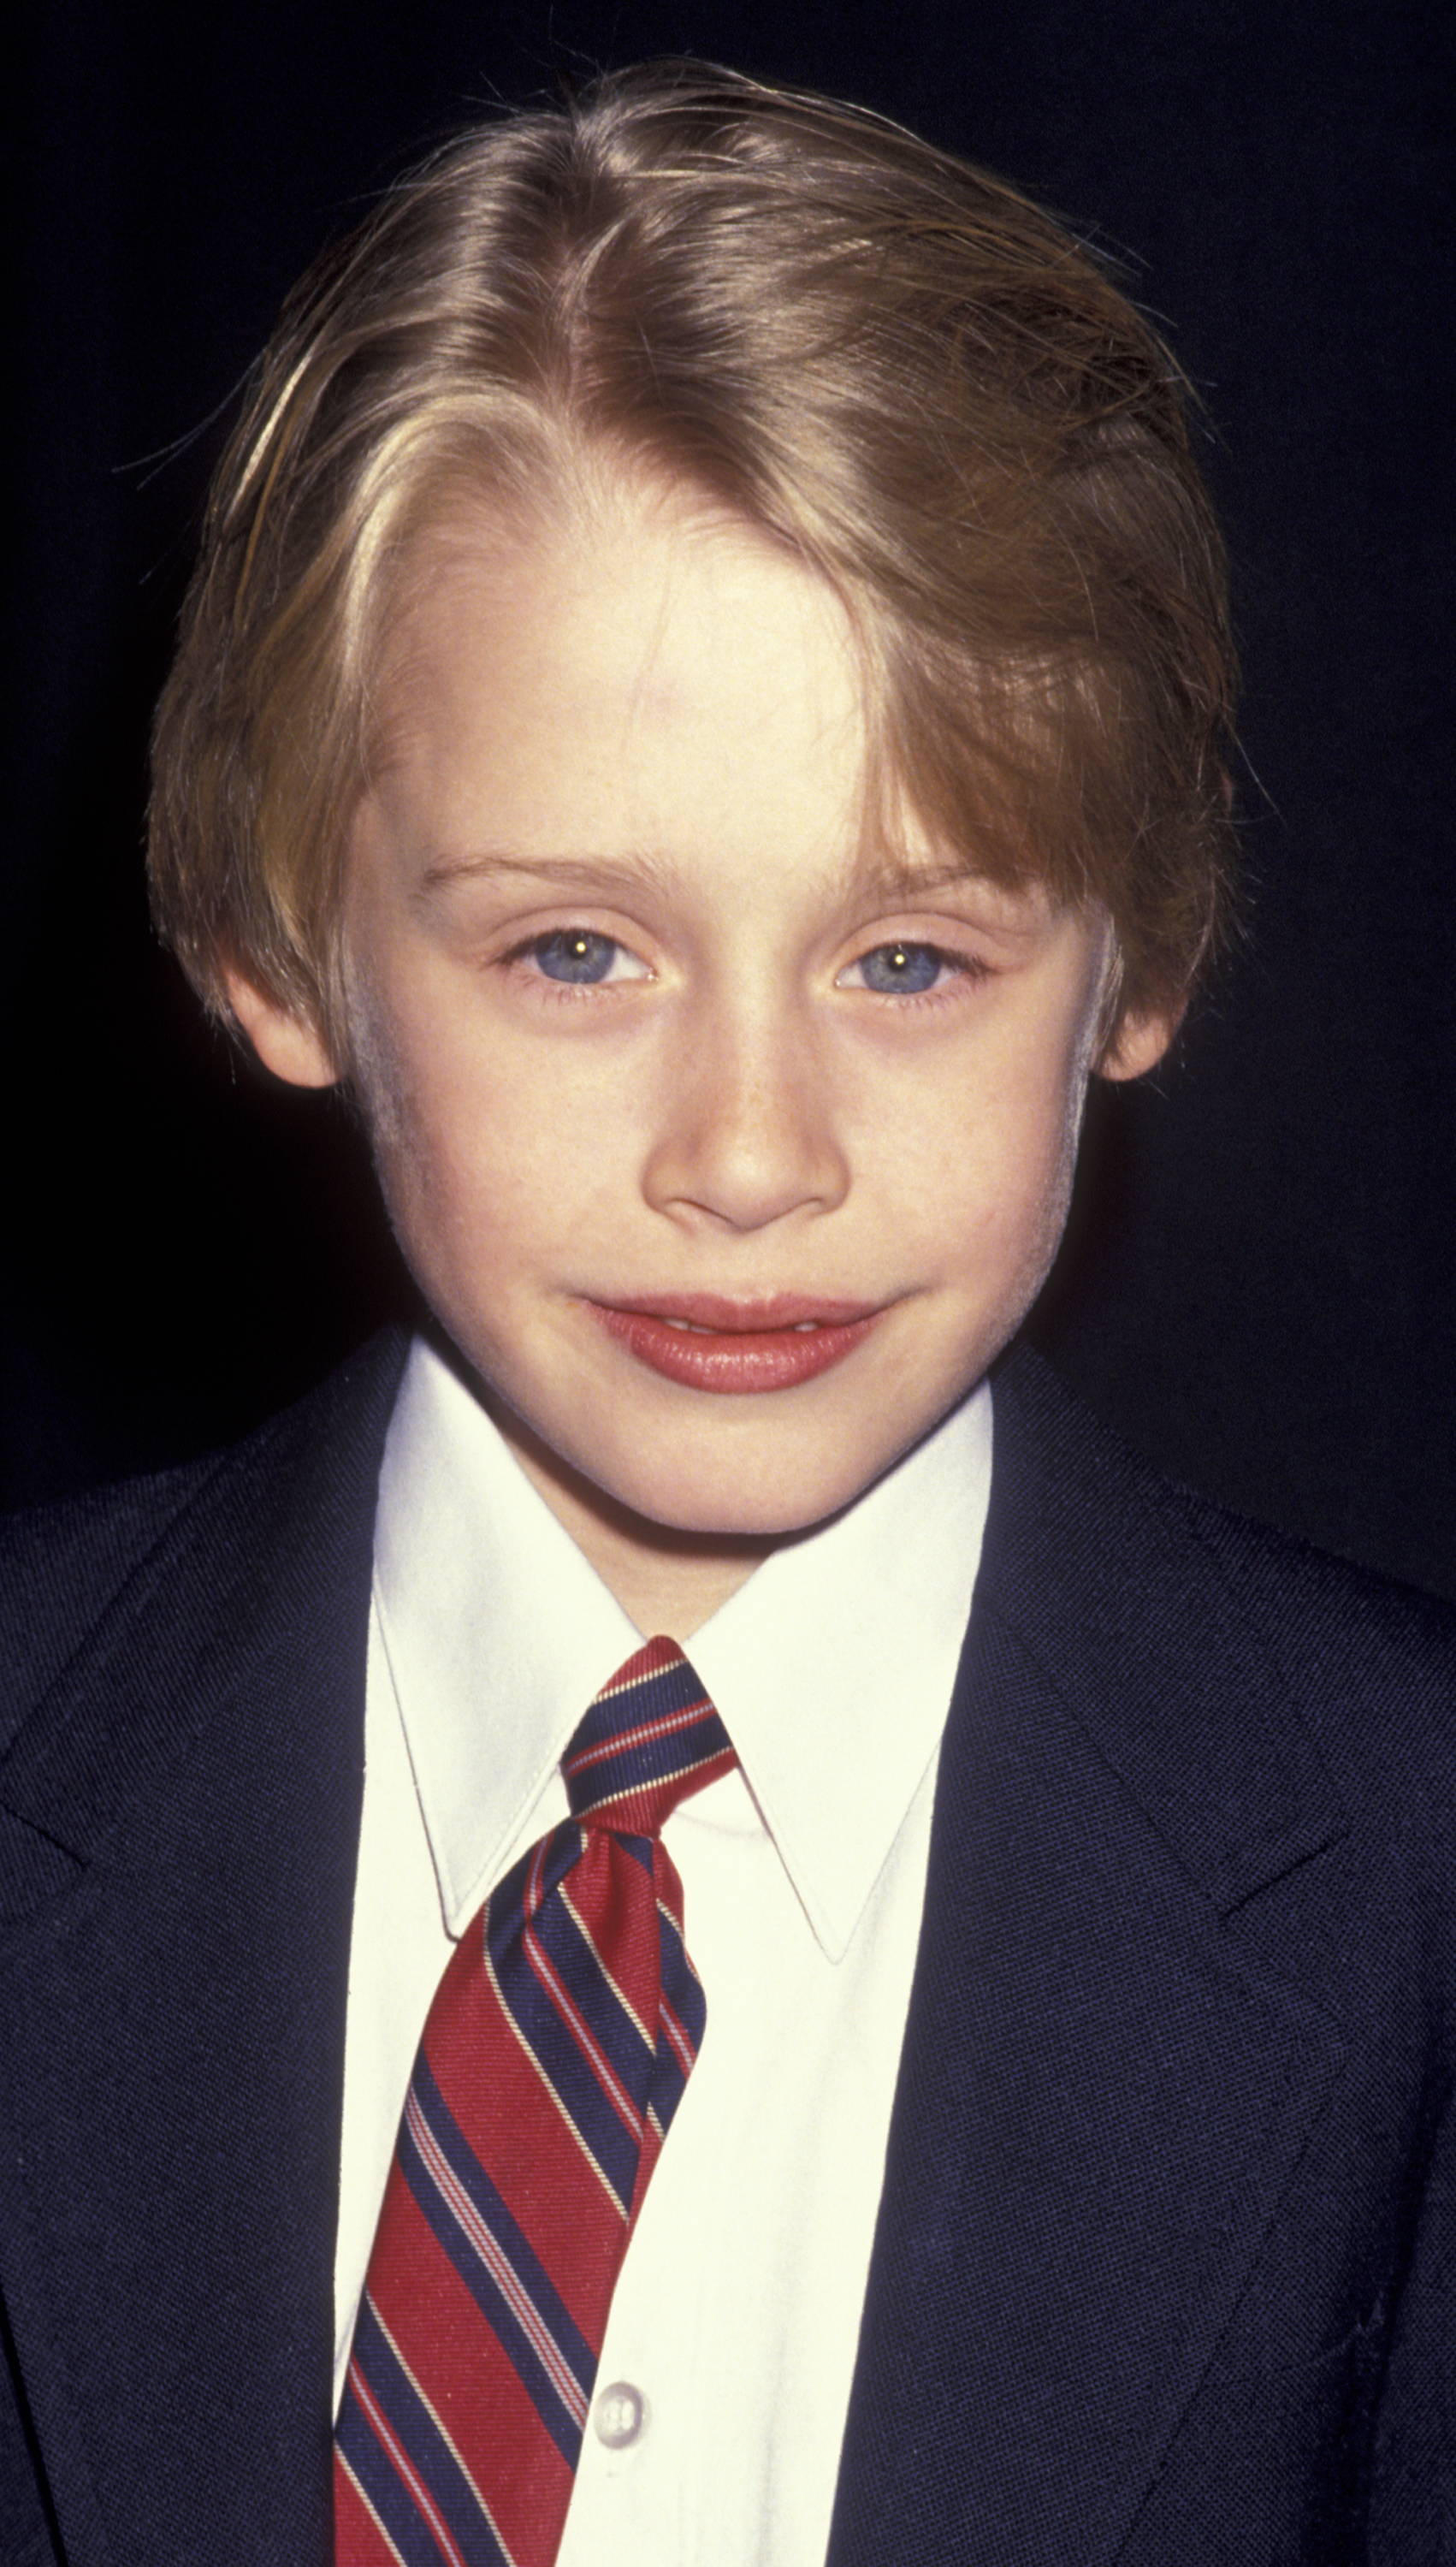 Macaulay Culkin bei den 62nd Annual National Board of Review Awards in New York City am 4. März 1991 | Quelle: Getty Images